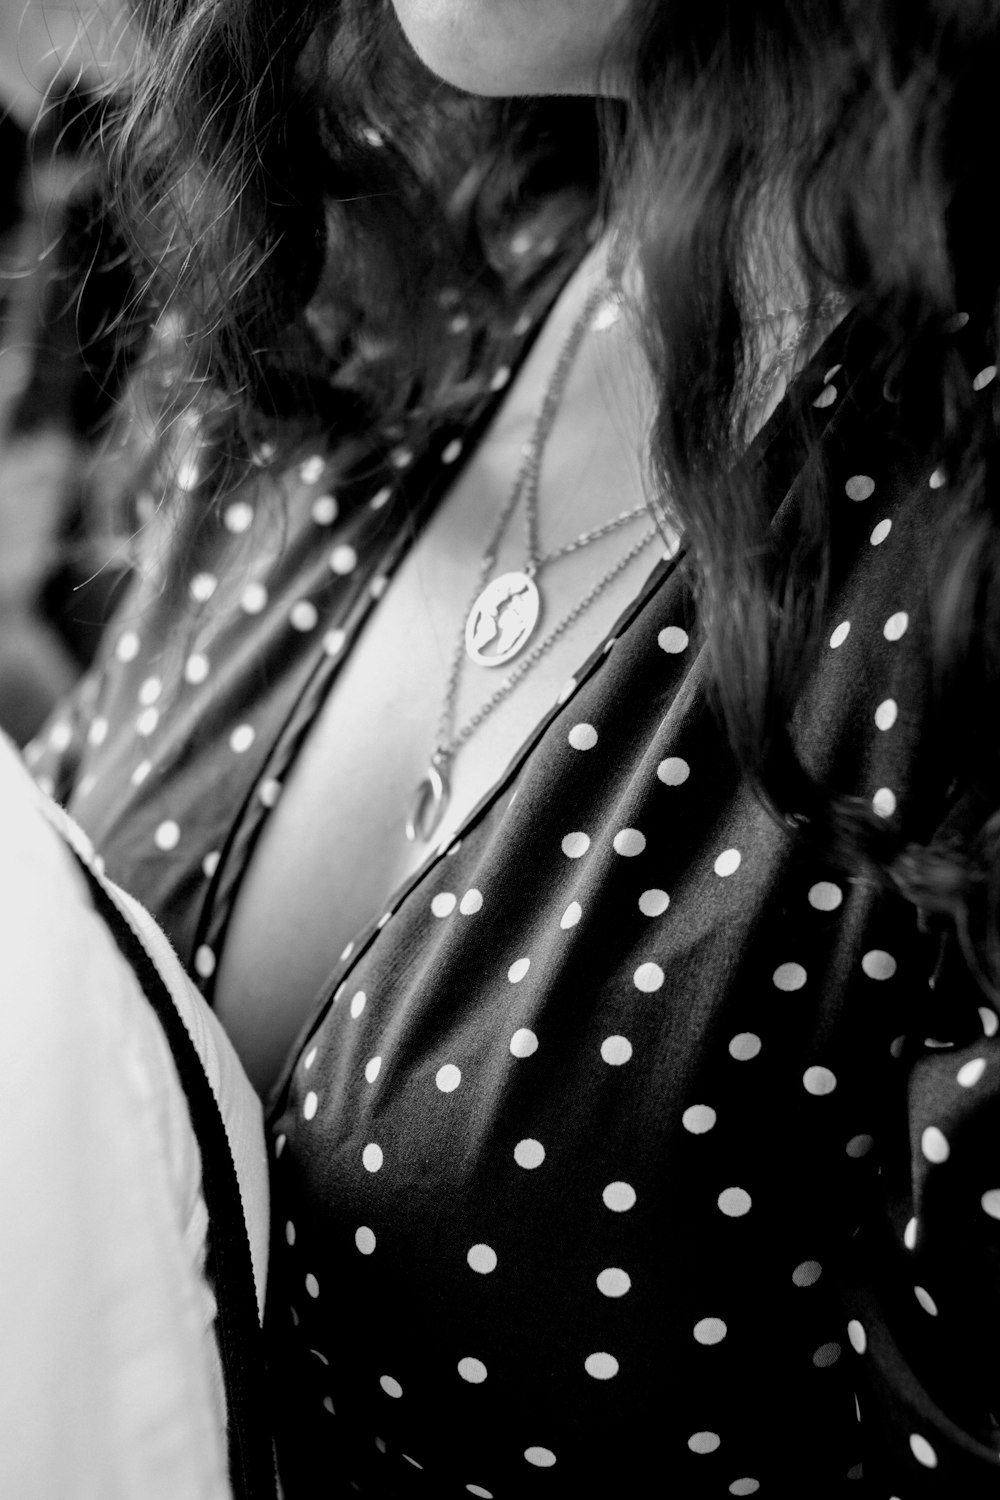 a woman wearing a polka dot shirt and a necklace